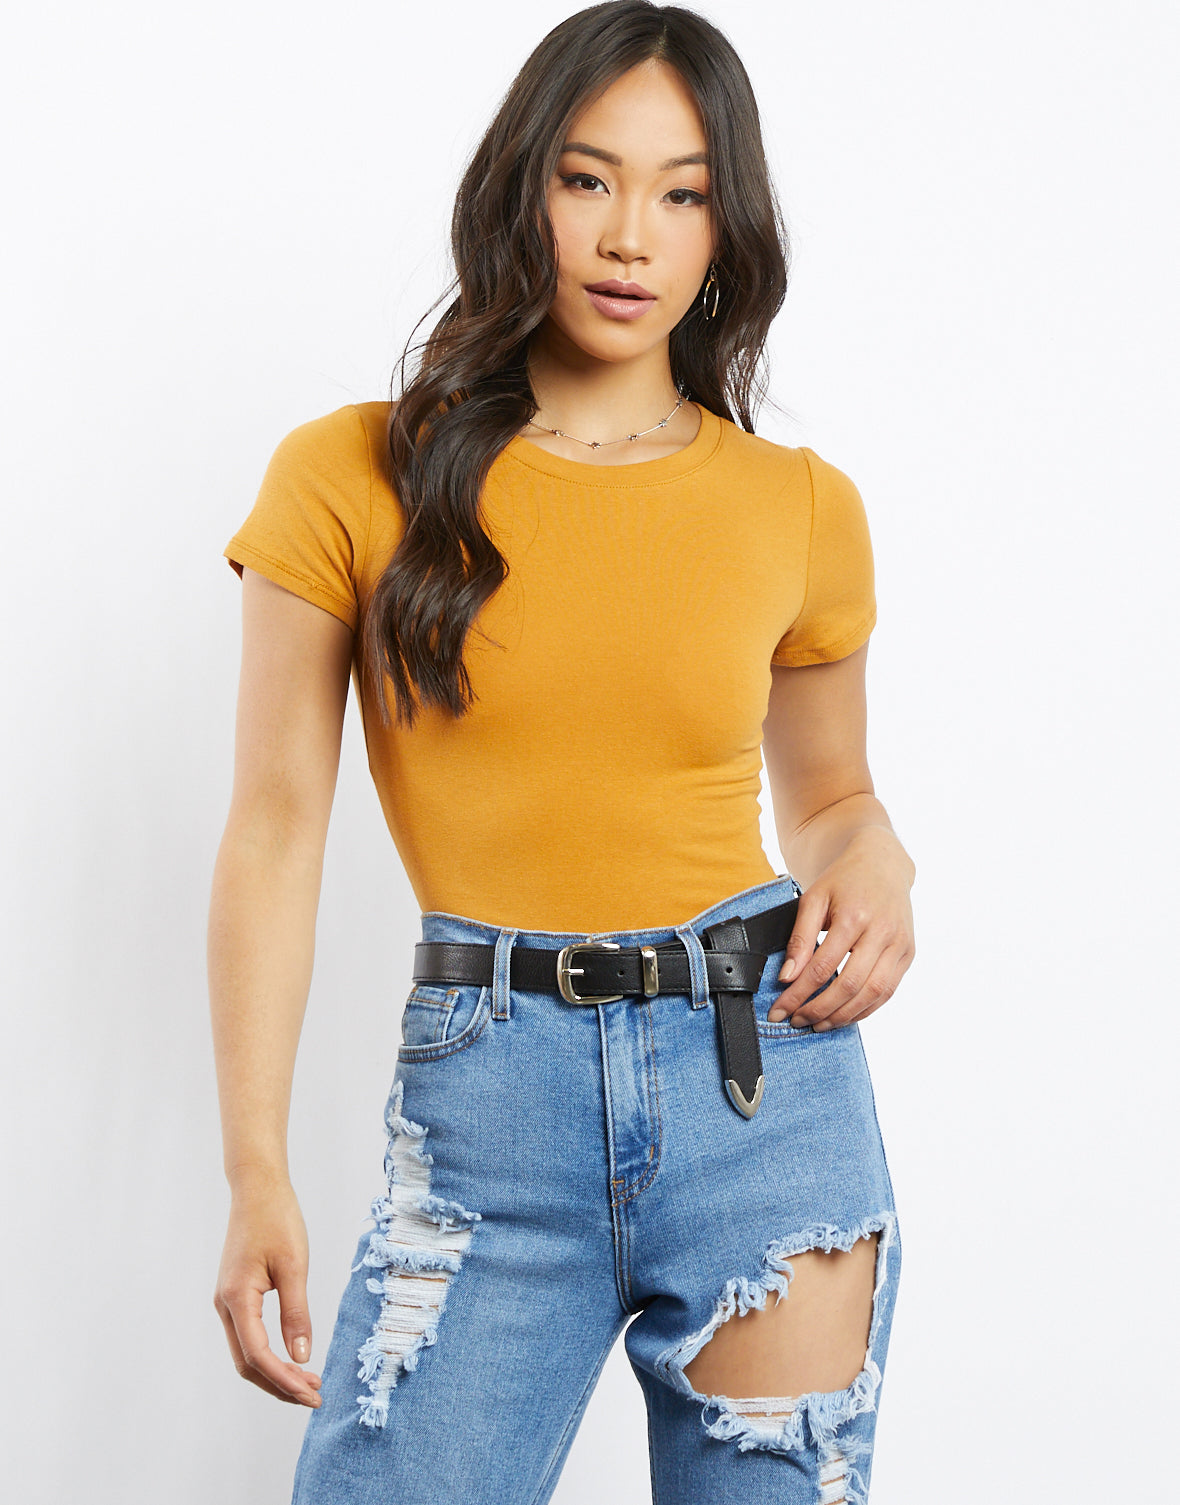 mustard yellow crop top outfit